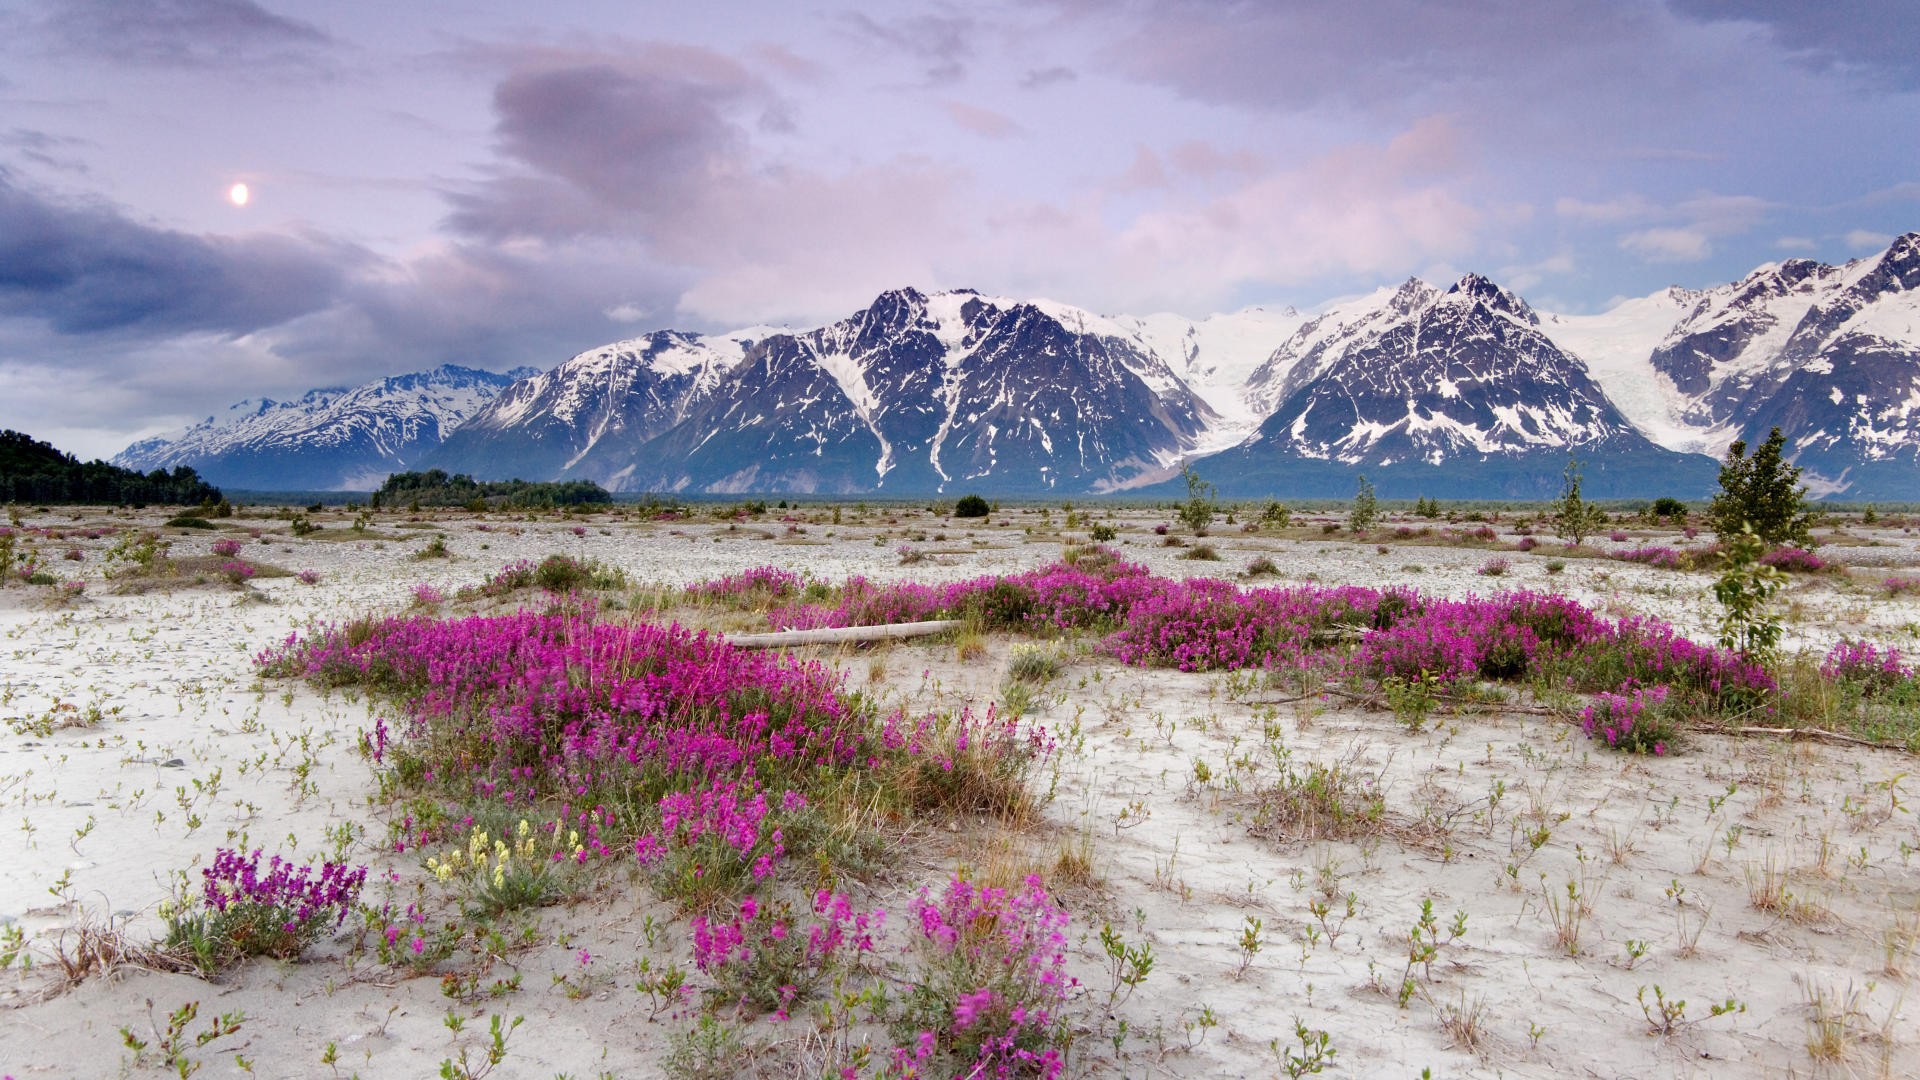 Nature___Flowers_Purple_flowers_in_the_sand_in_the_mountains_099092_.jpg